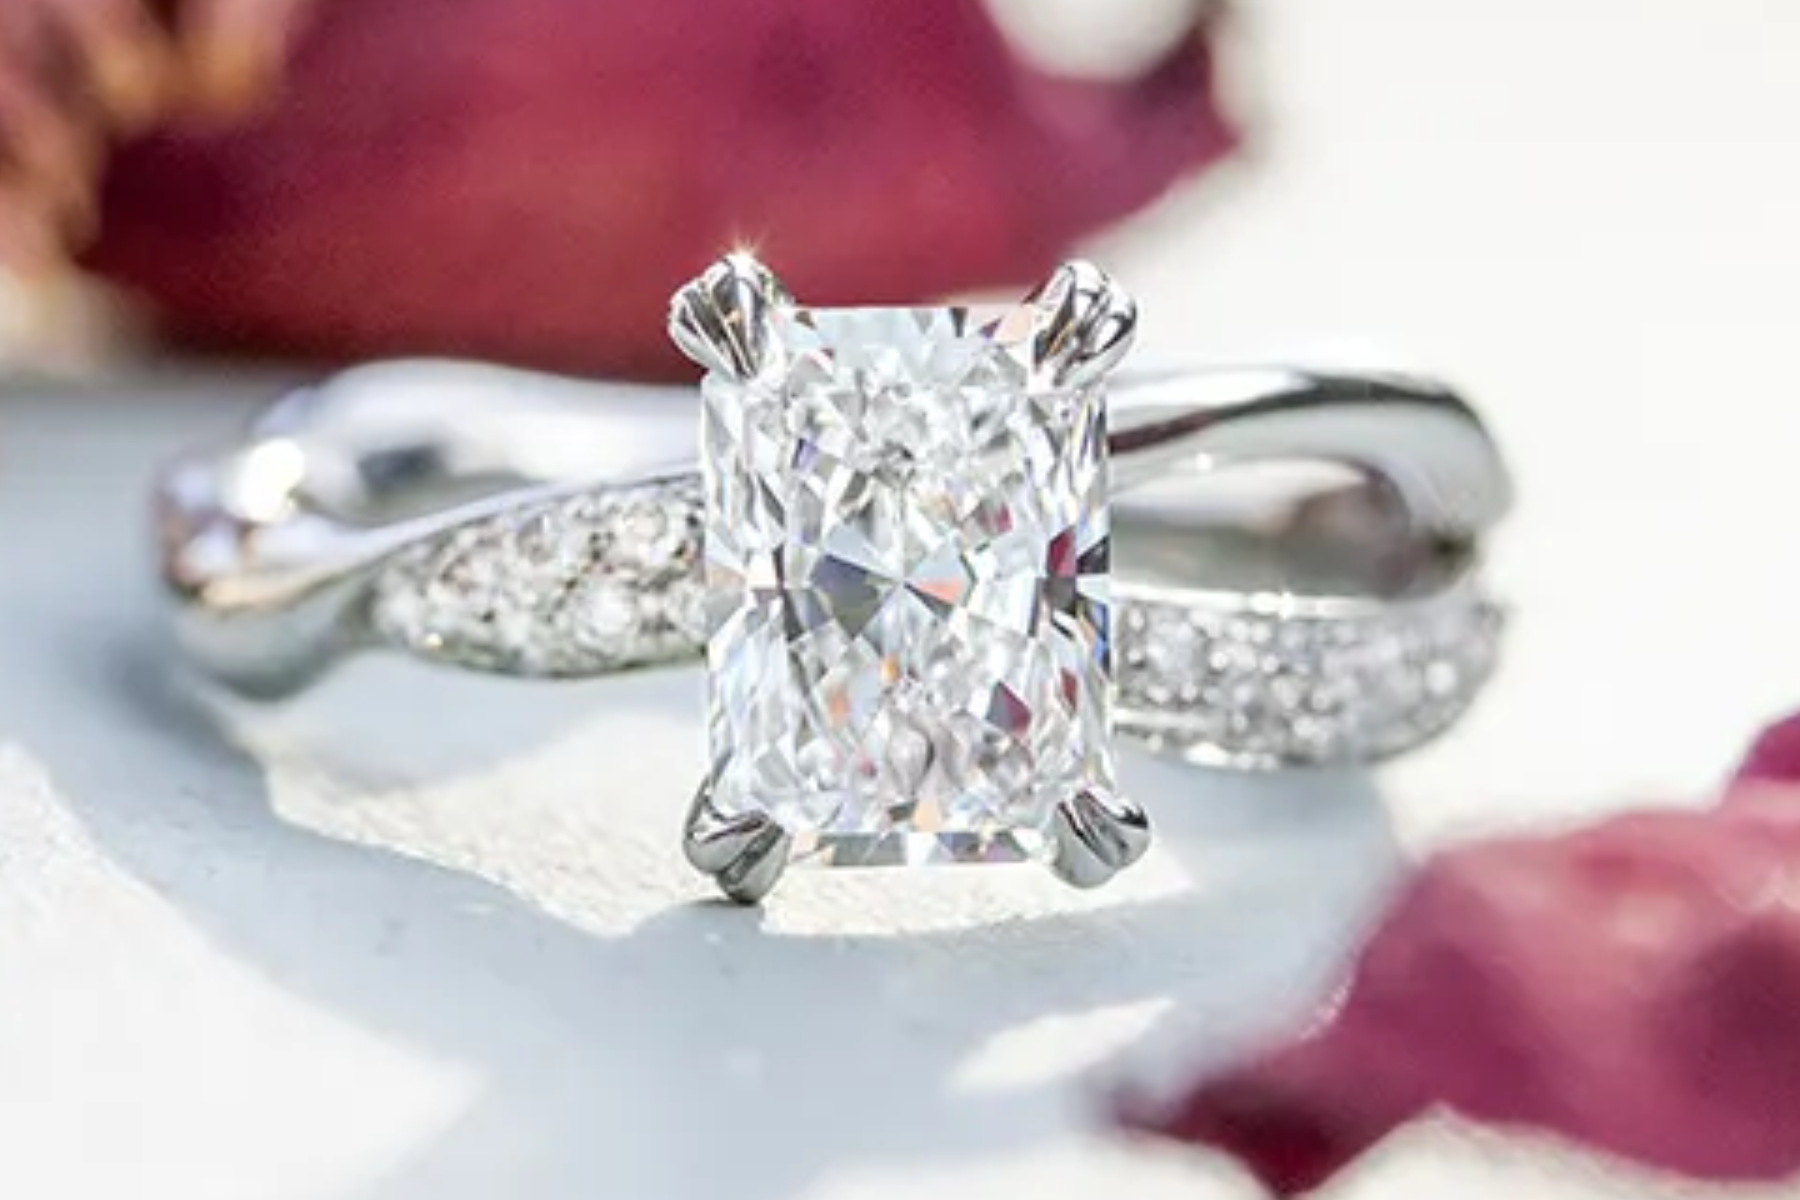 An engagement ring featuring a radiant-cut diamond placed on top of scattered flower petals